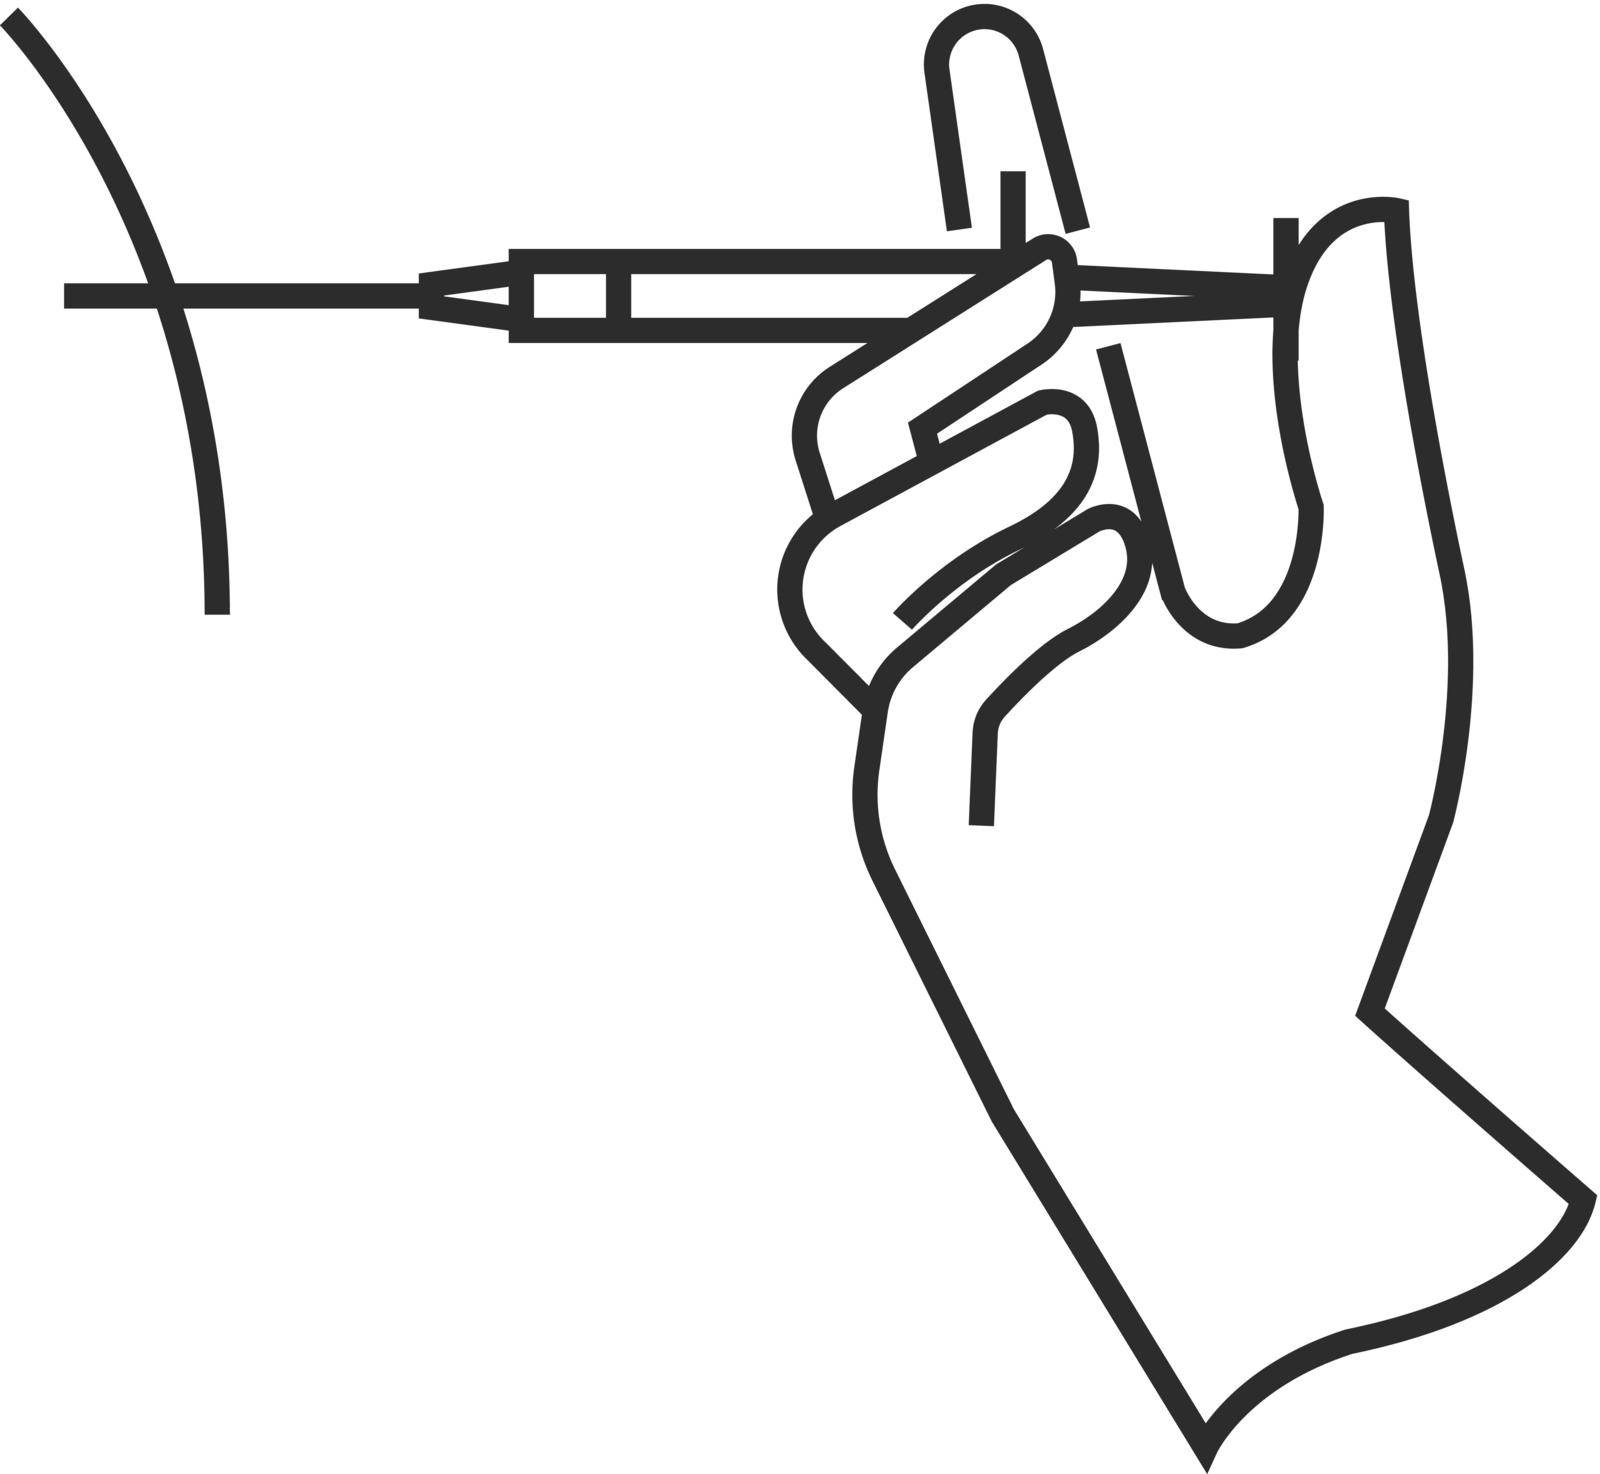 Vaccination icon in thin outline by puruan